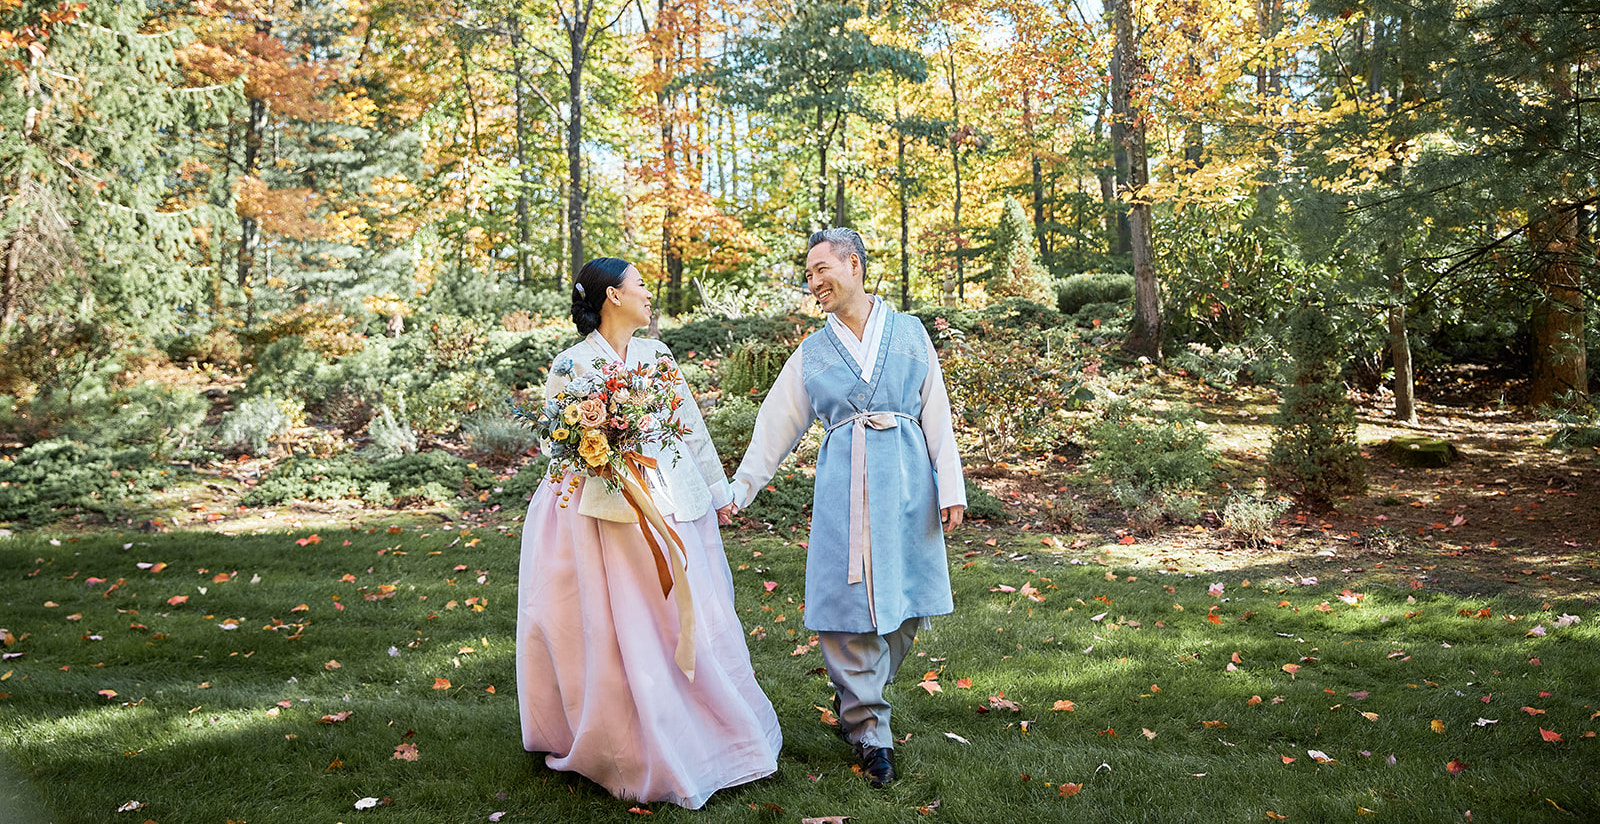 After the Korean Pyebaek Ceremony, This Couple Hosted Their Reception at Eleven Madison Park